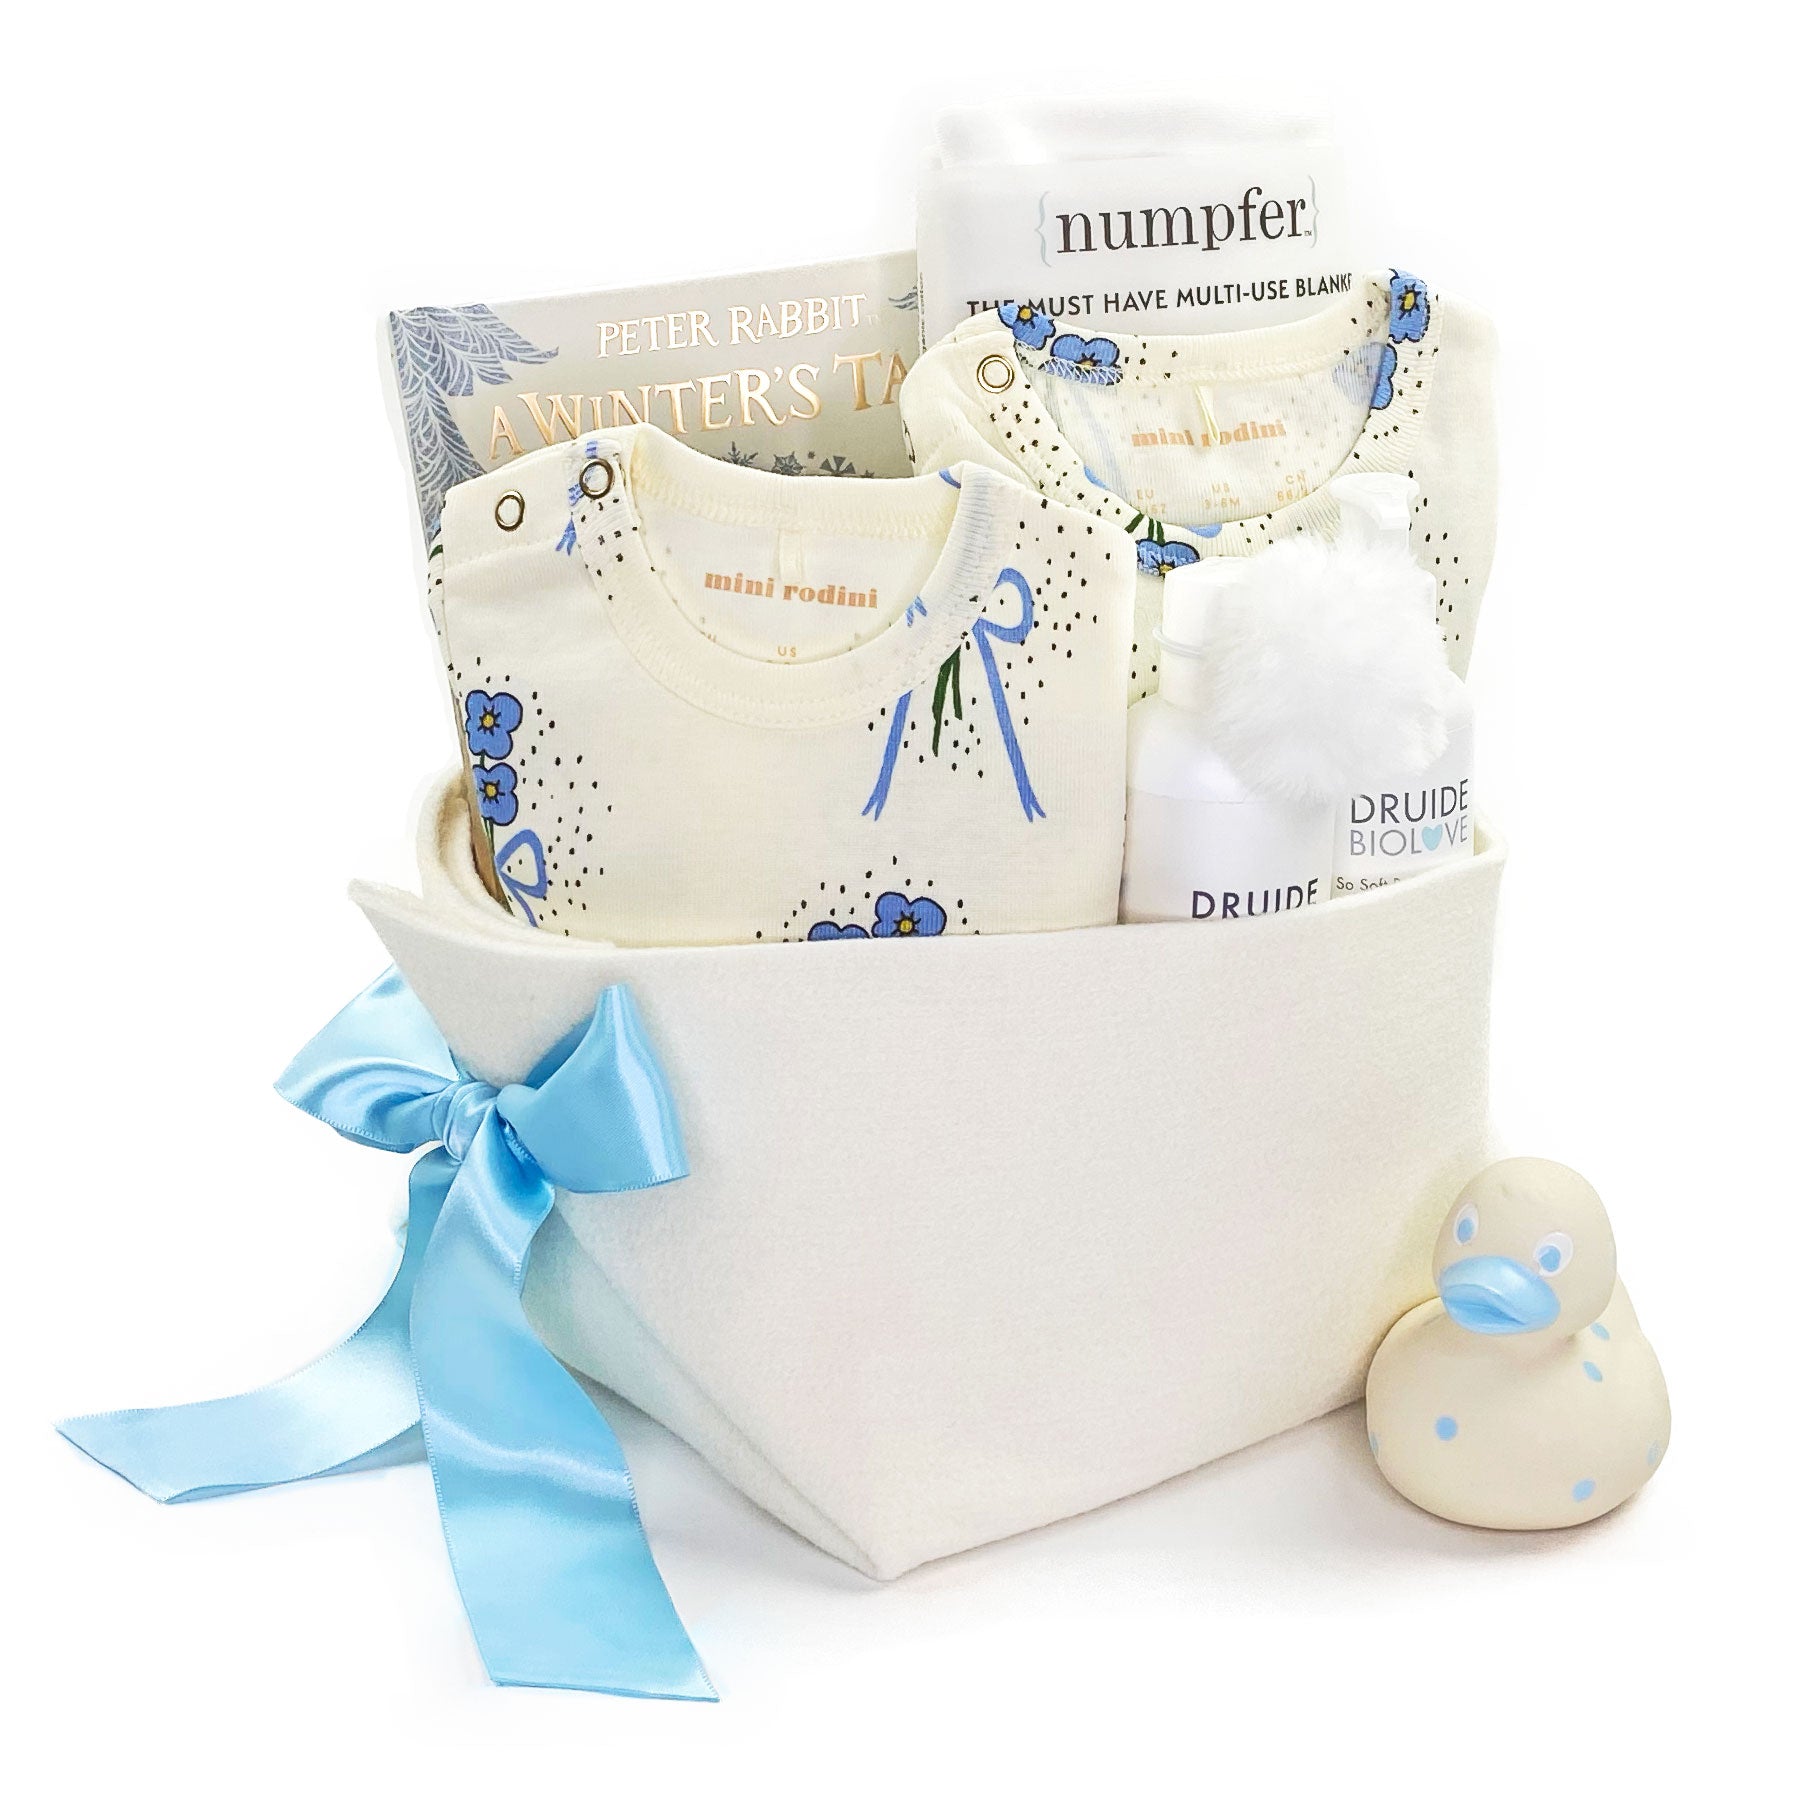 Luxury Baby Gift Basket featuring Mini Rodini, best corporate baby gifts